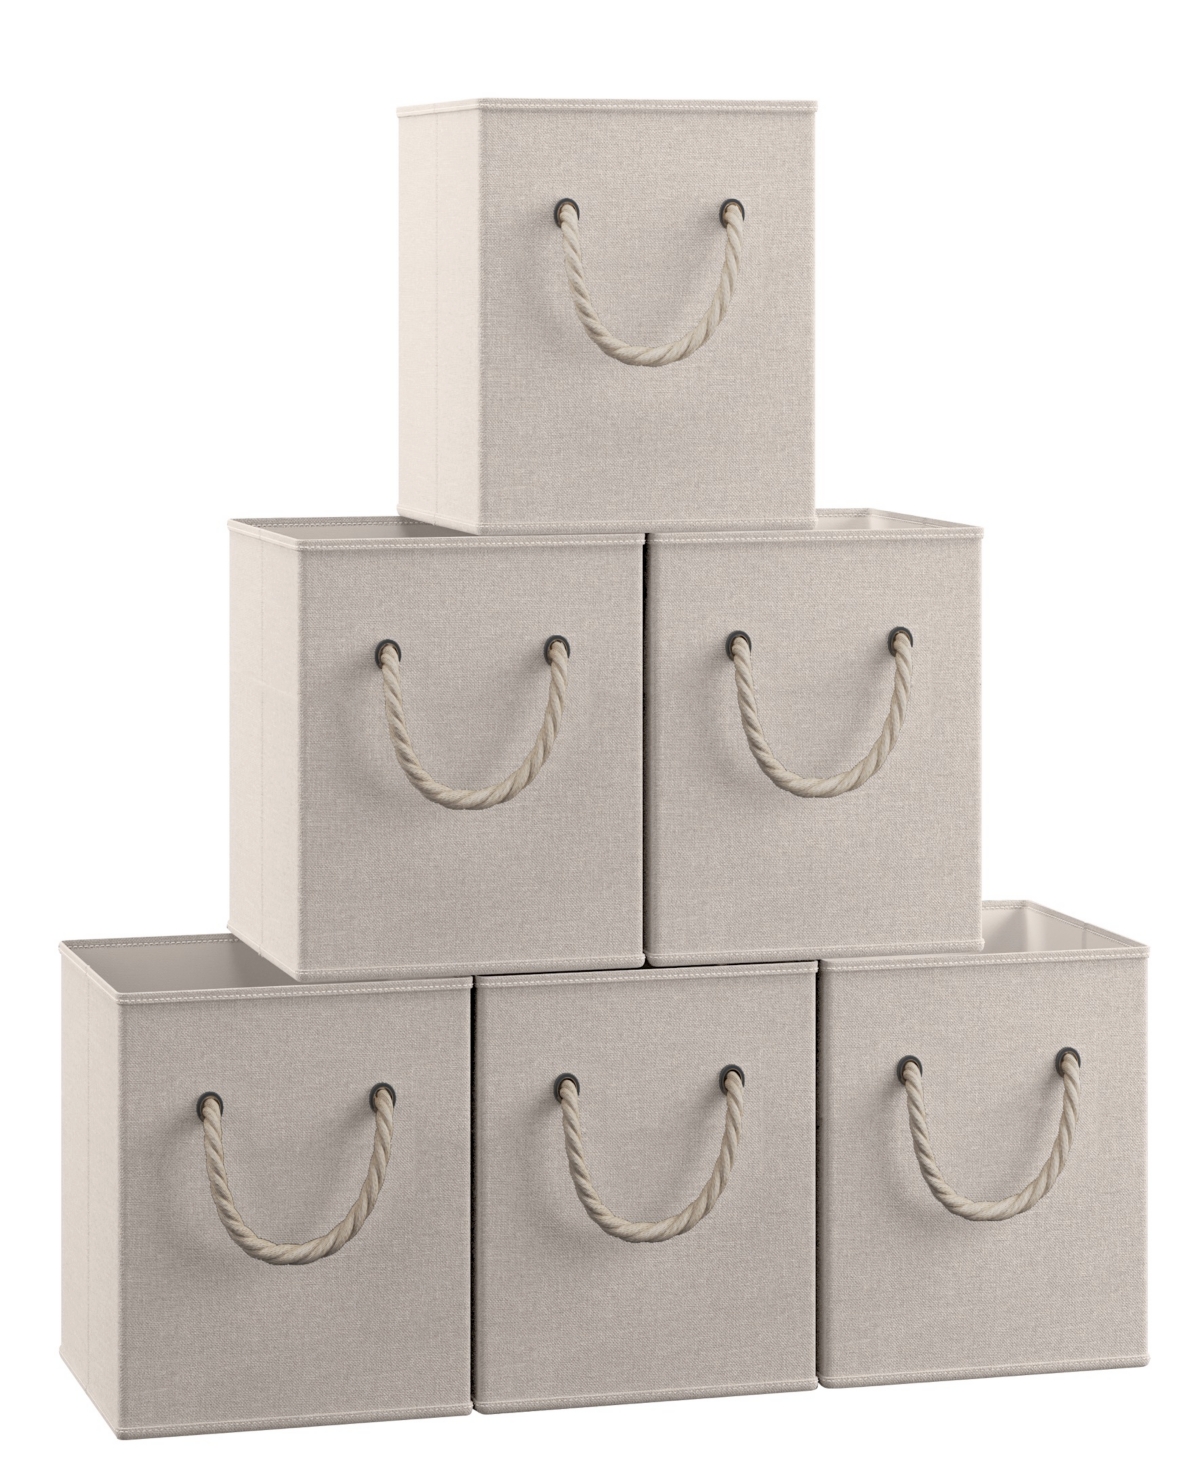 Ornavo Home Foldable Linen Storage Cube Bin With Rope Handles In Beige